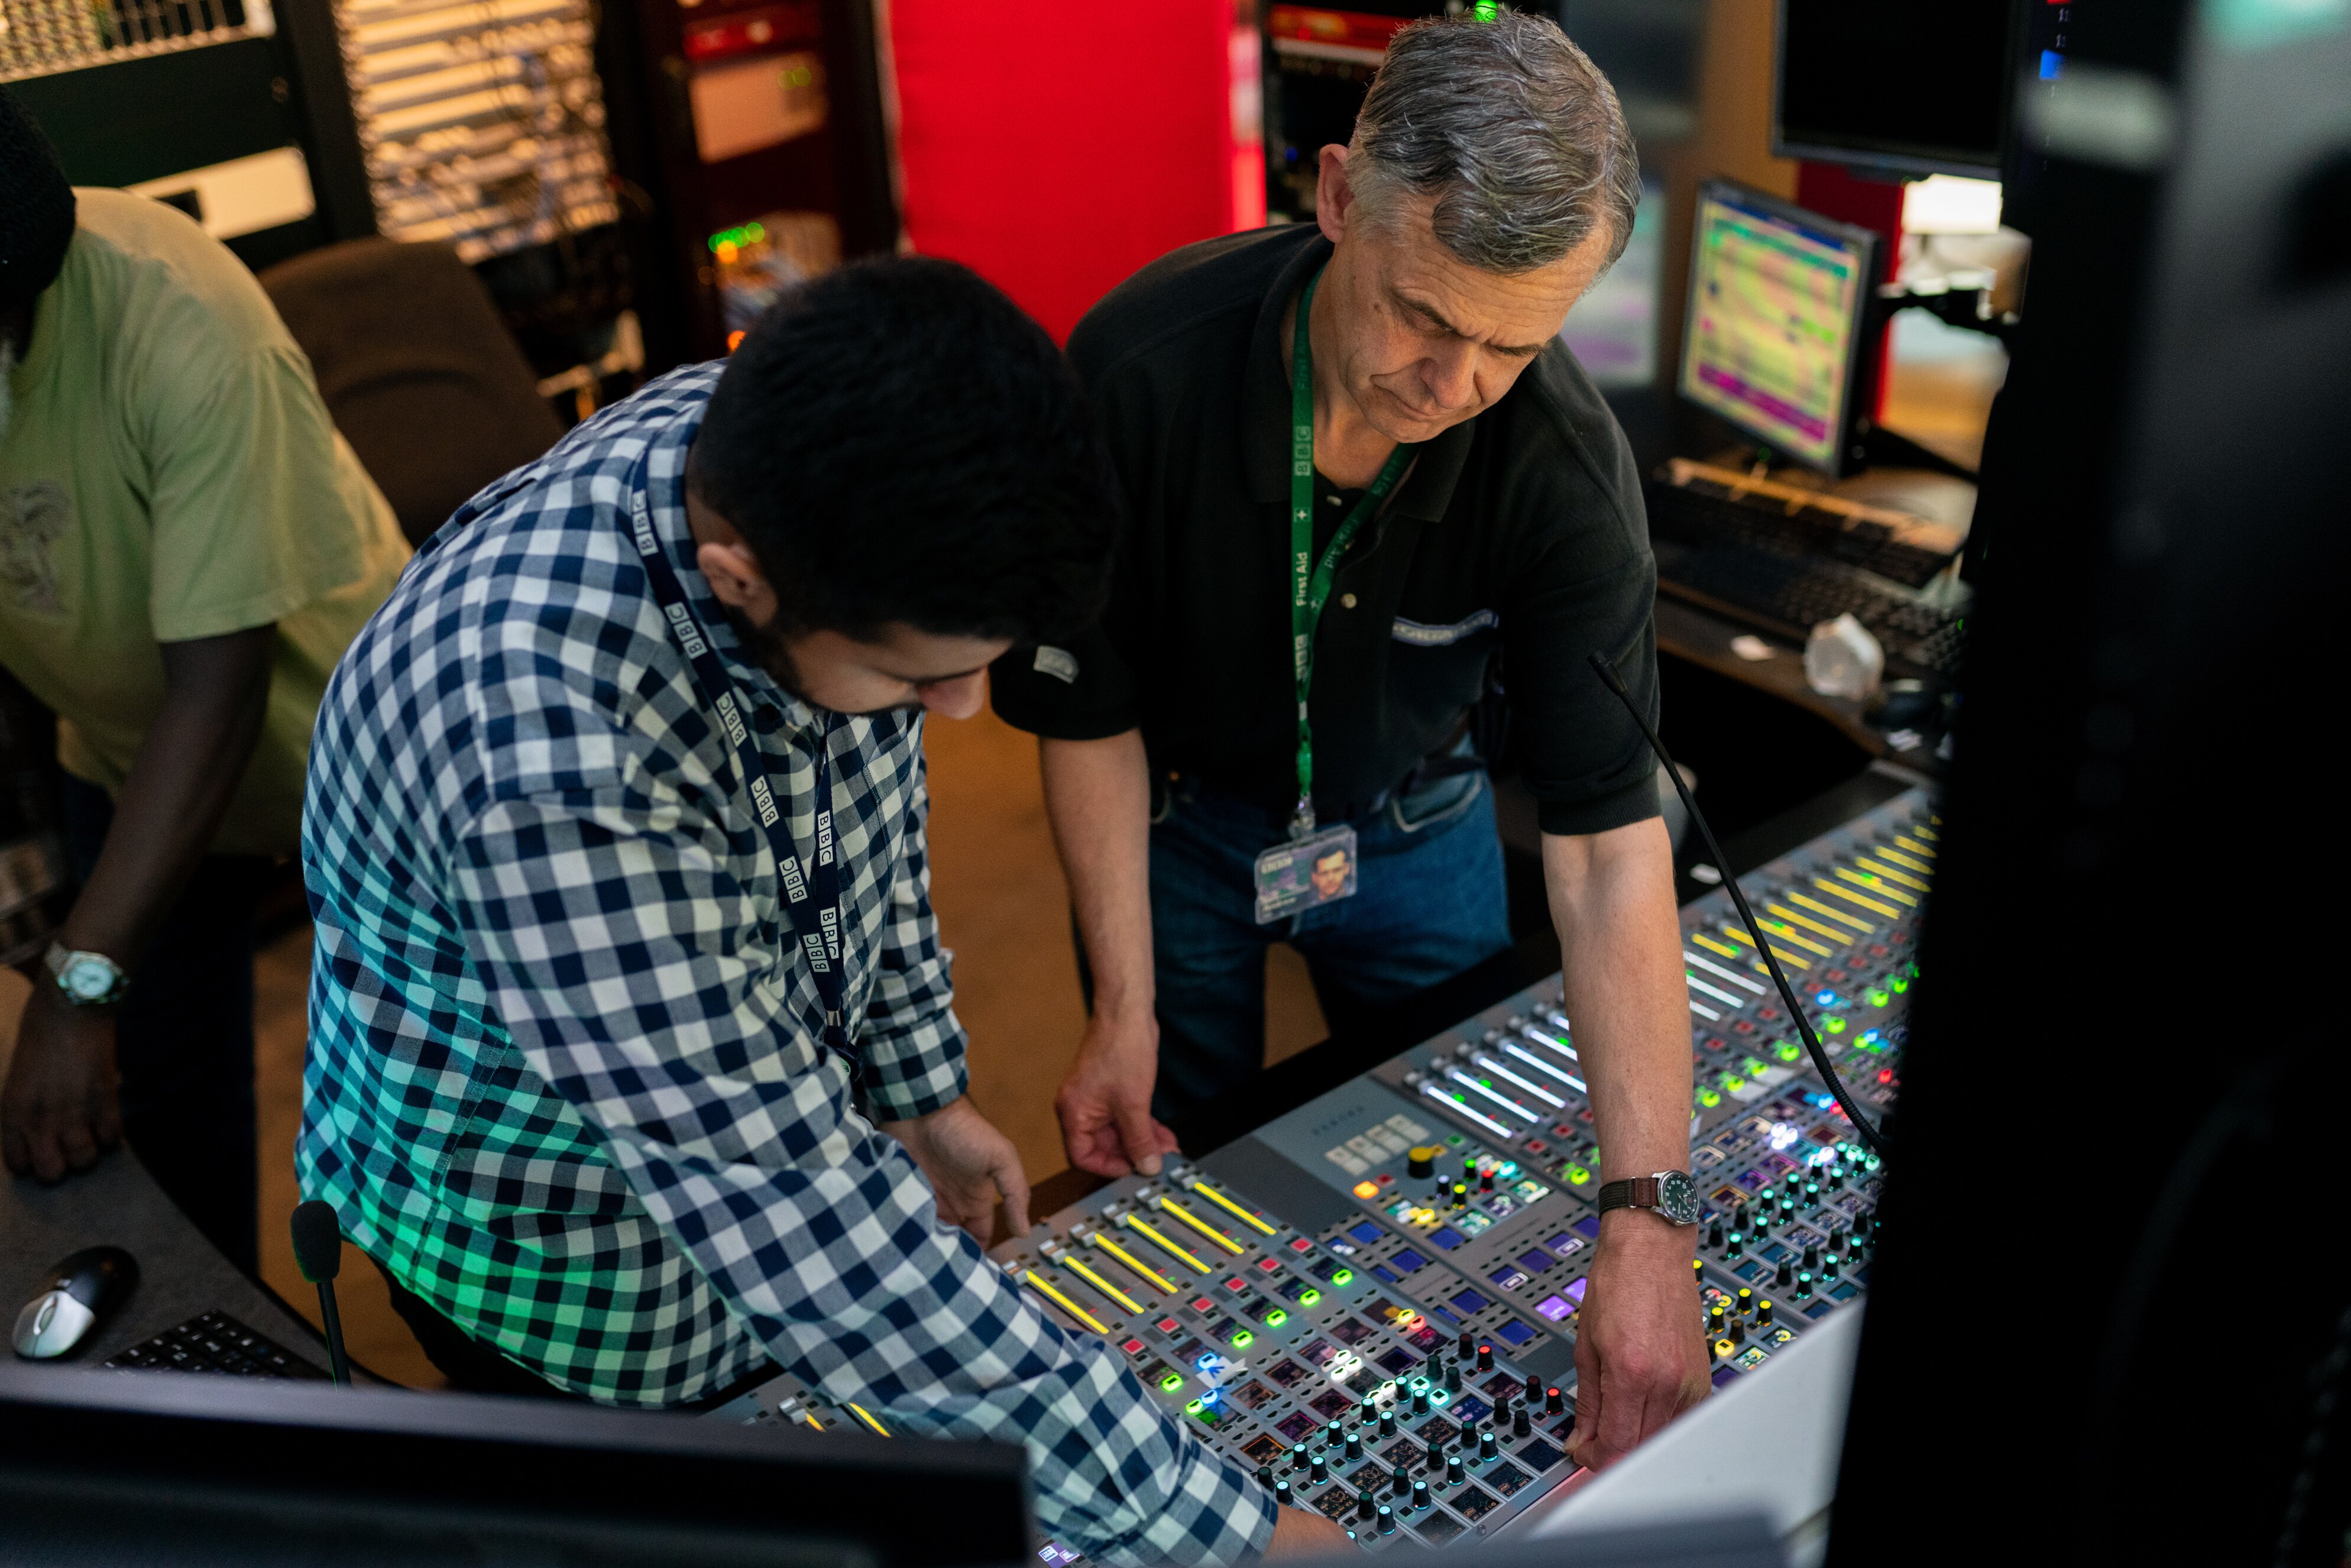 Two men working on a sound mixing desk in a studio